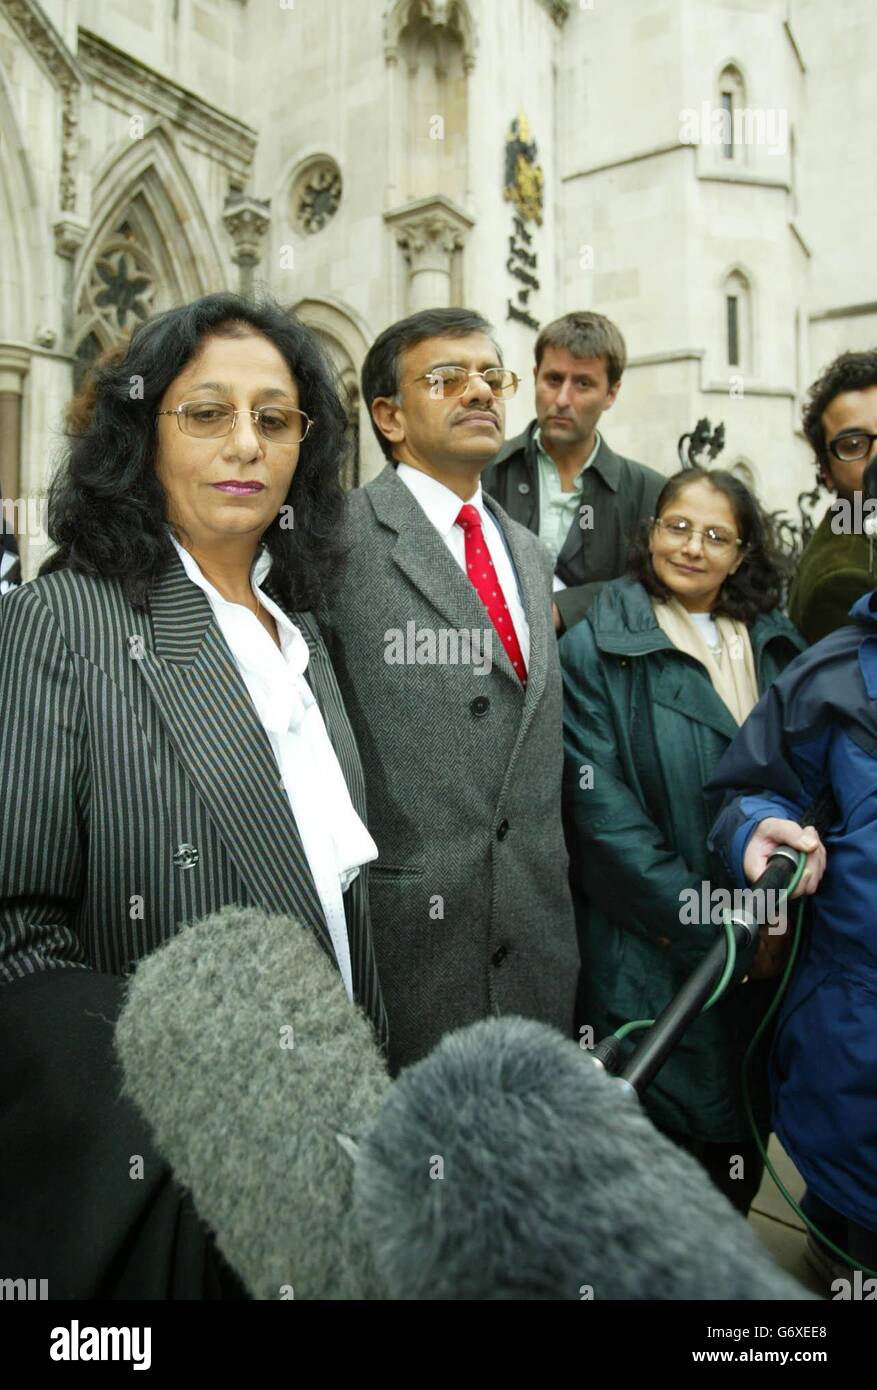 (L-R) Chitralekha Mehta, Yogesh Pathak, Anila Shastri, stand outside the High Court, London, speak to the media following the bitter legal battle which tore apart the family behind the multi-million pound 'Patak's' spices empire, has today ended in a provisional 12 million settlement. The family have agreed a peace pact at the Court between company boss Kirit Pathak and his two married sisters, who claimed they had been cheated out of shares allocated to them by their late father. Sisters, Chitralekha, 56, and Anila, 52, said later that they will receive a total of around 6 million each under Stock Photo